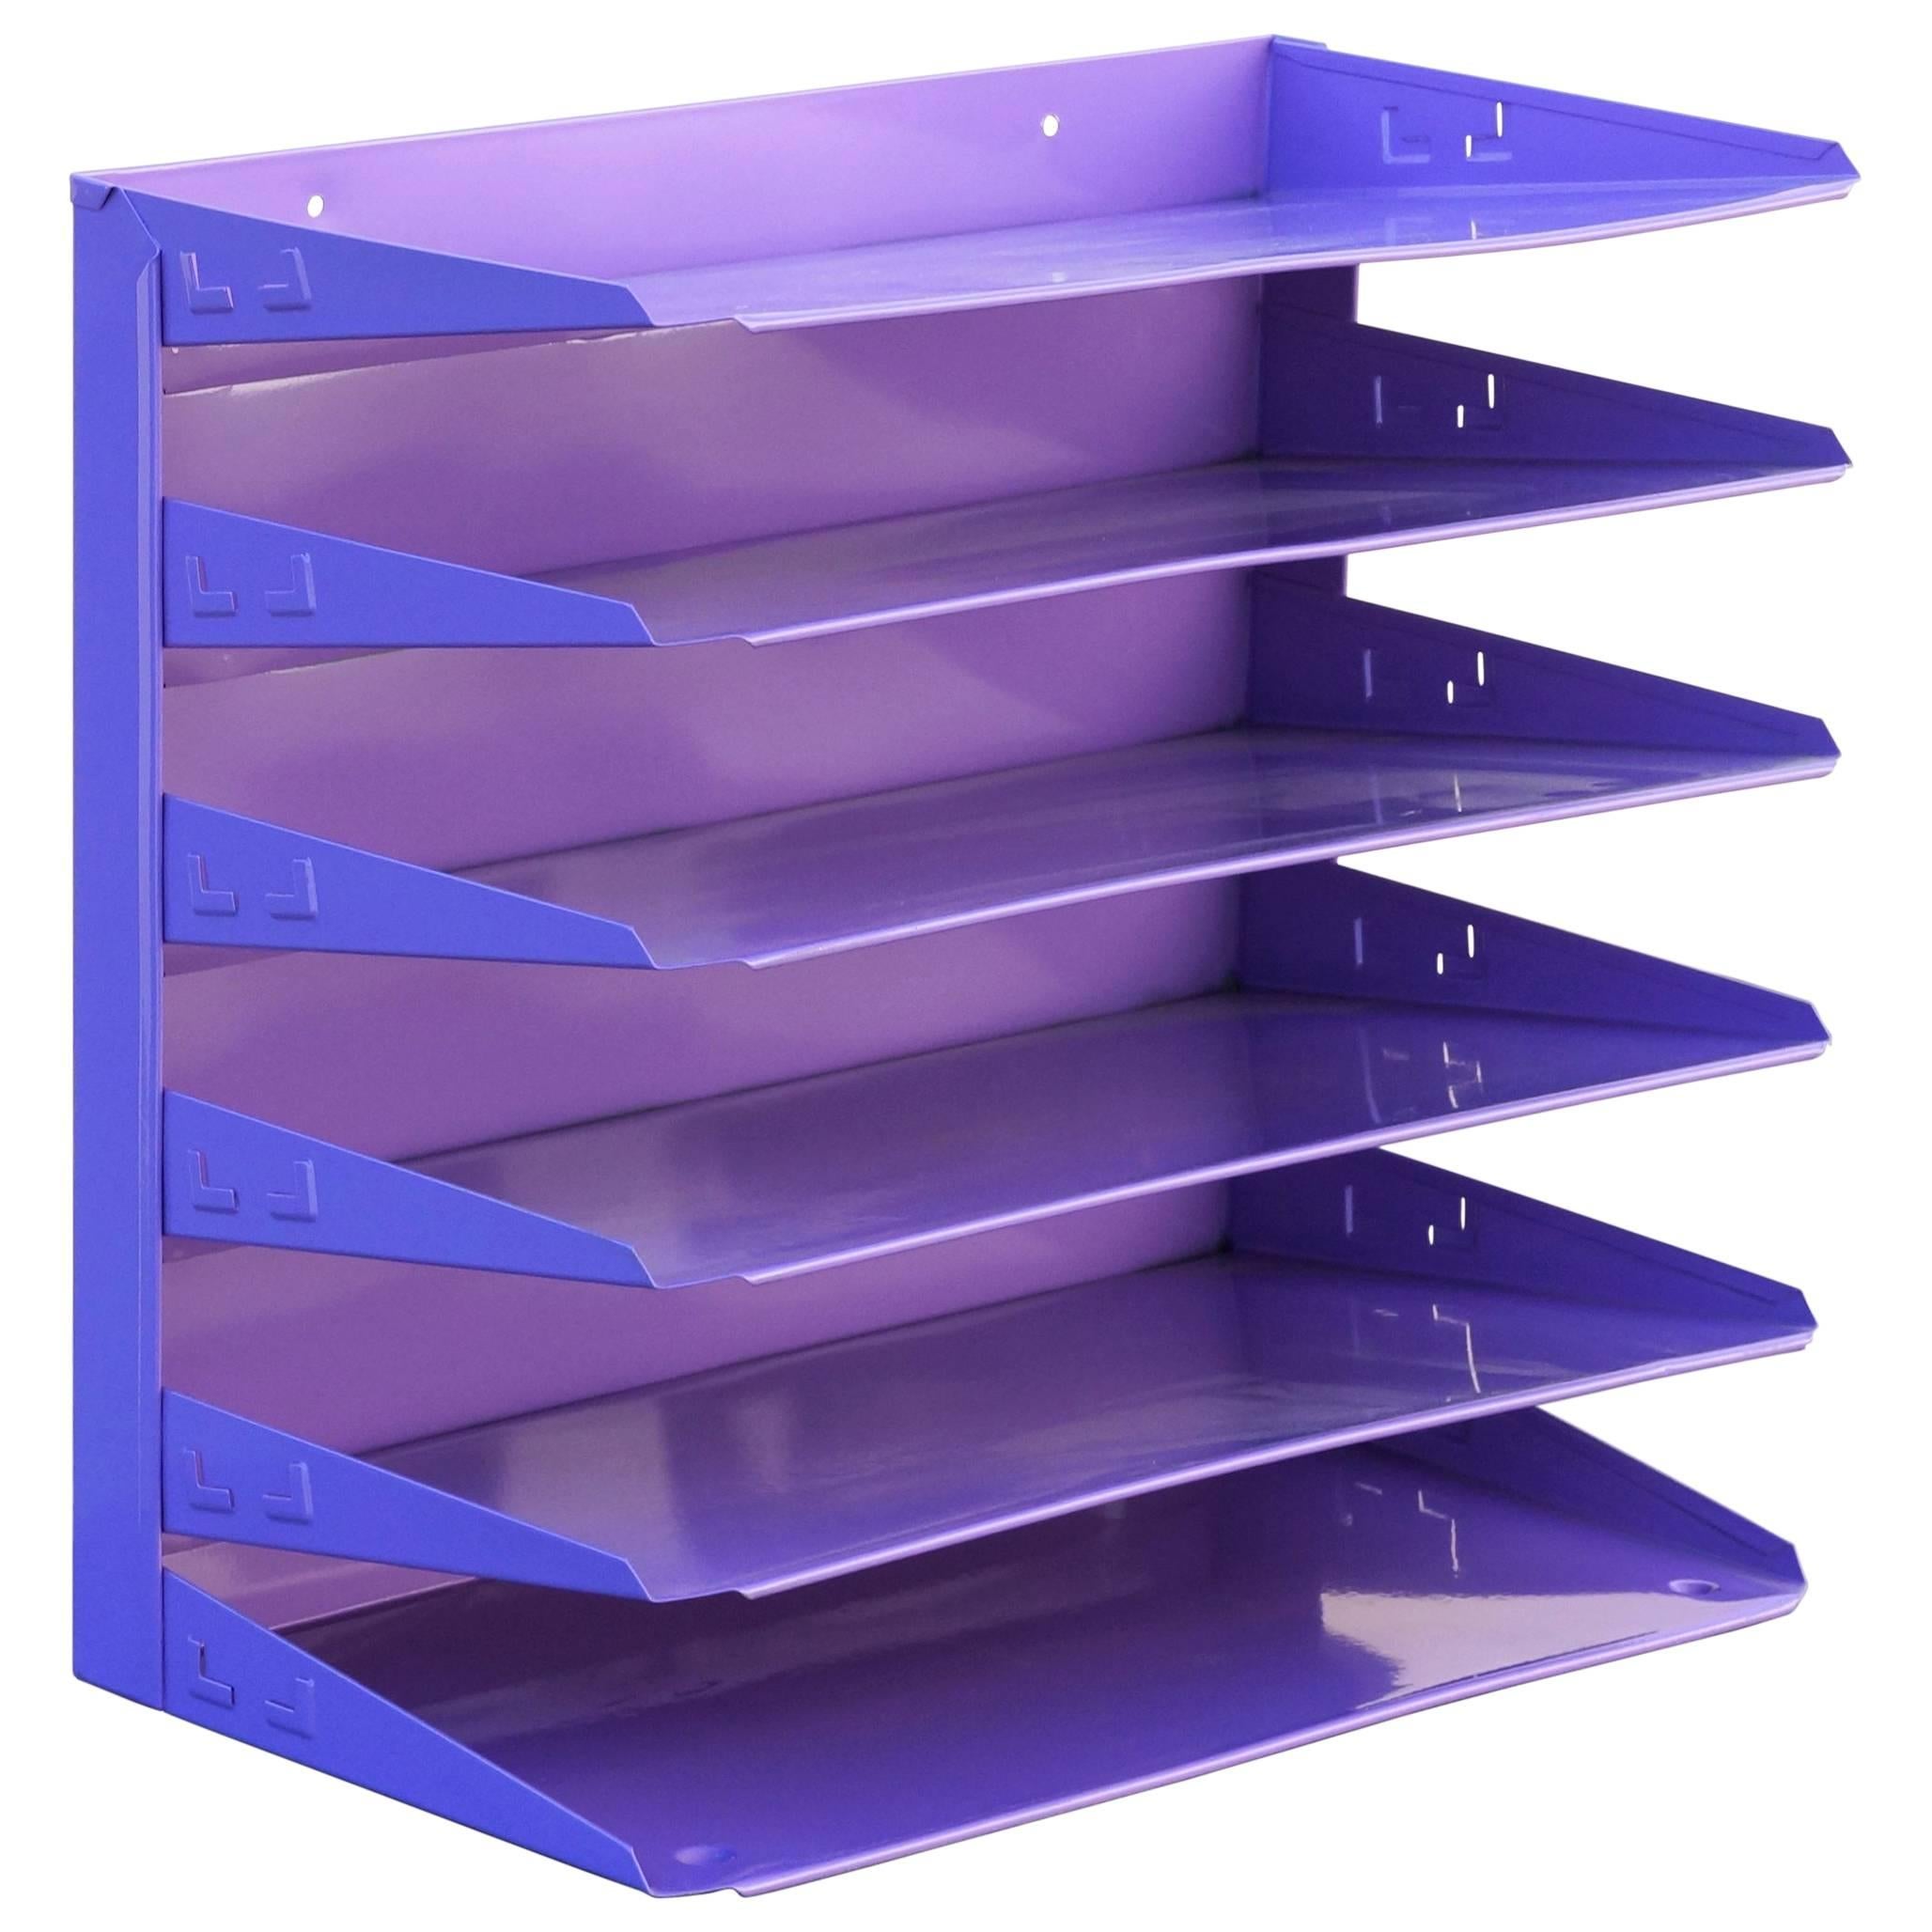 Midcentury Office Mail Organizer Refinished in Lilac